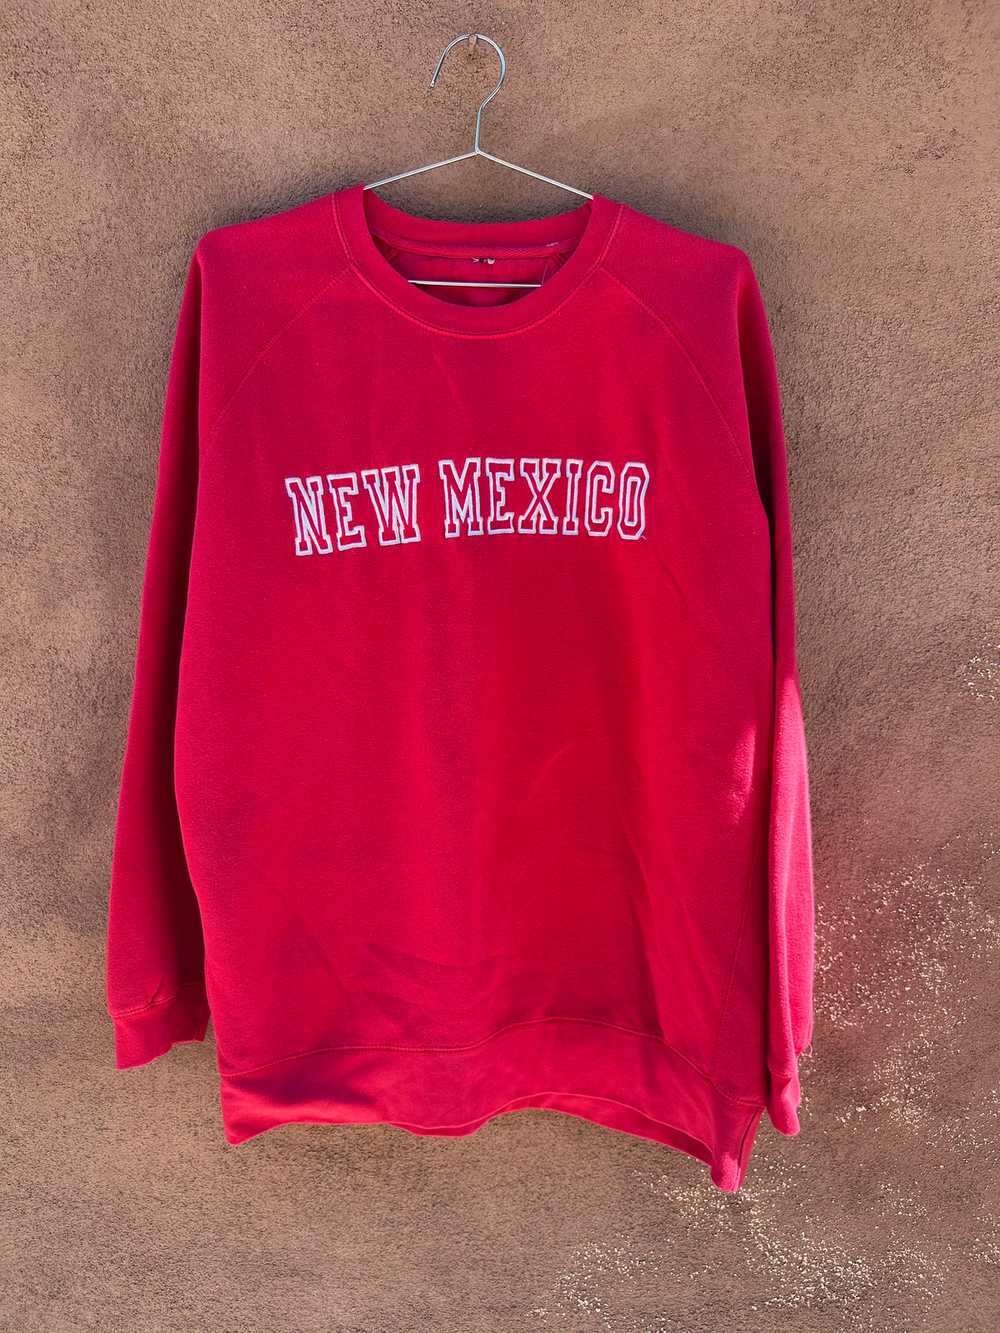 Cherry & Silver Embroidered New Mexico Sweatshirt - image 1